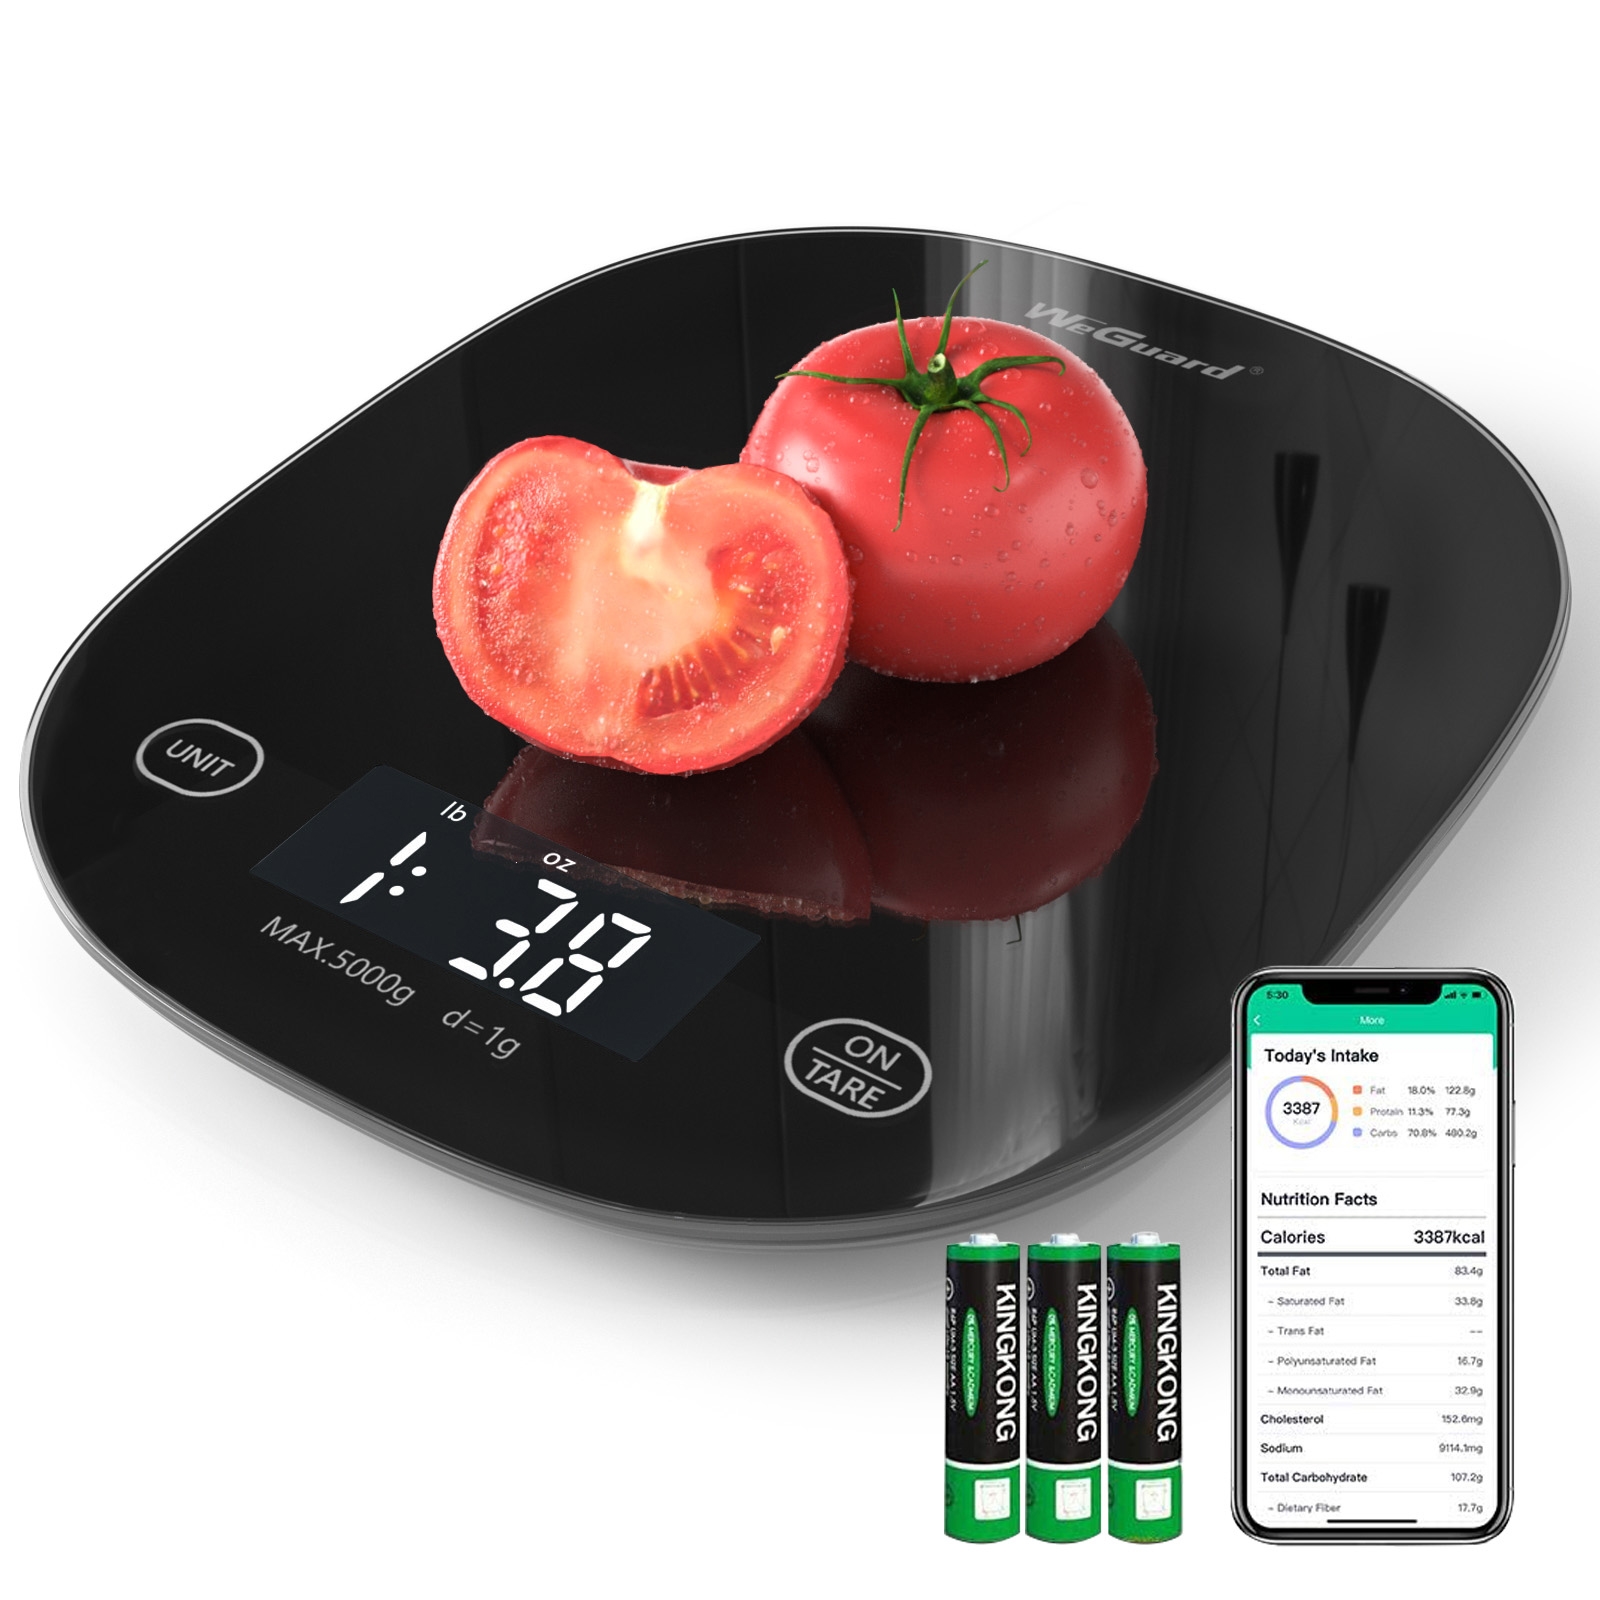 WeGuard Digital Food Kitchen Scale, Perfect for Cooking, Baking, Meal Planning, Multifunction Scale Measures in Grams and Ounces - image 1 of 6